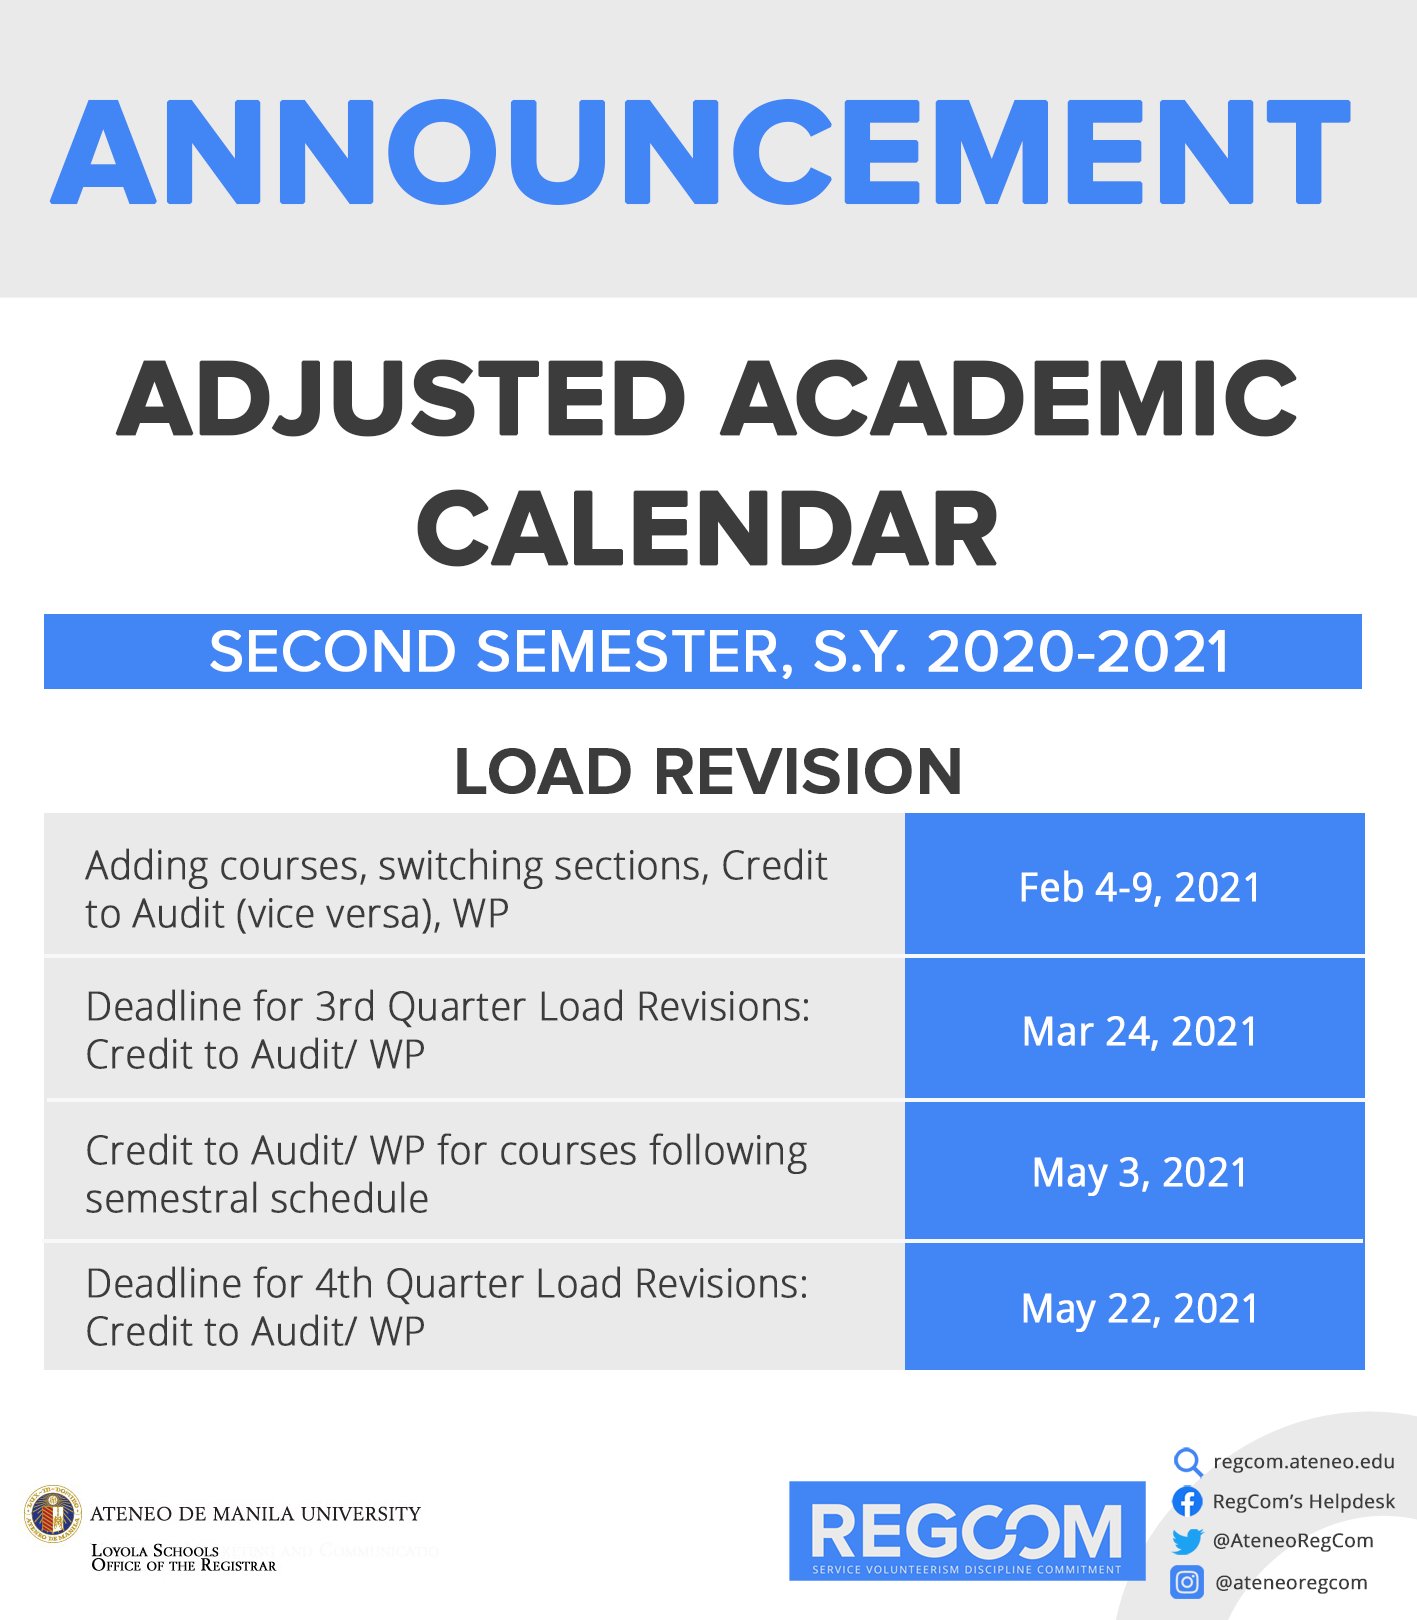 Ateneo Regcom On Twitter Good Day Ateneans Displayed Below Are The Enlistment Dates And The Adjusted Academic Calendar For The Second Semester Sy 2020 2021 Kindly Take Note Of The Enlistment Schedule For